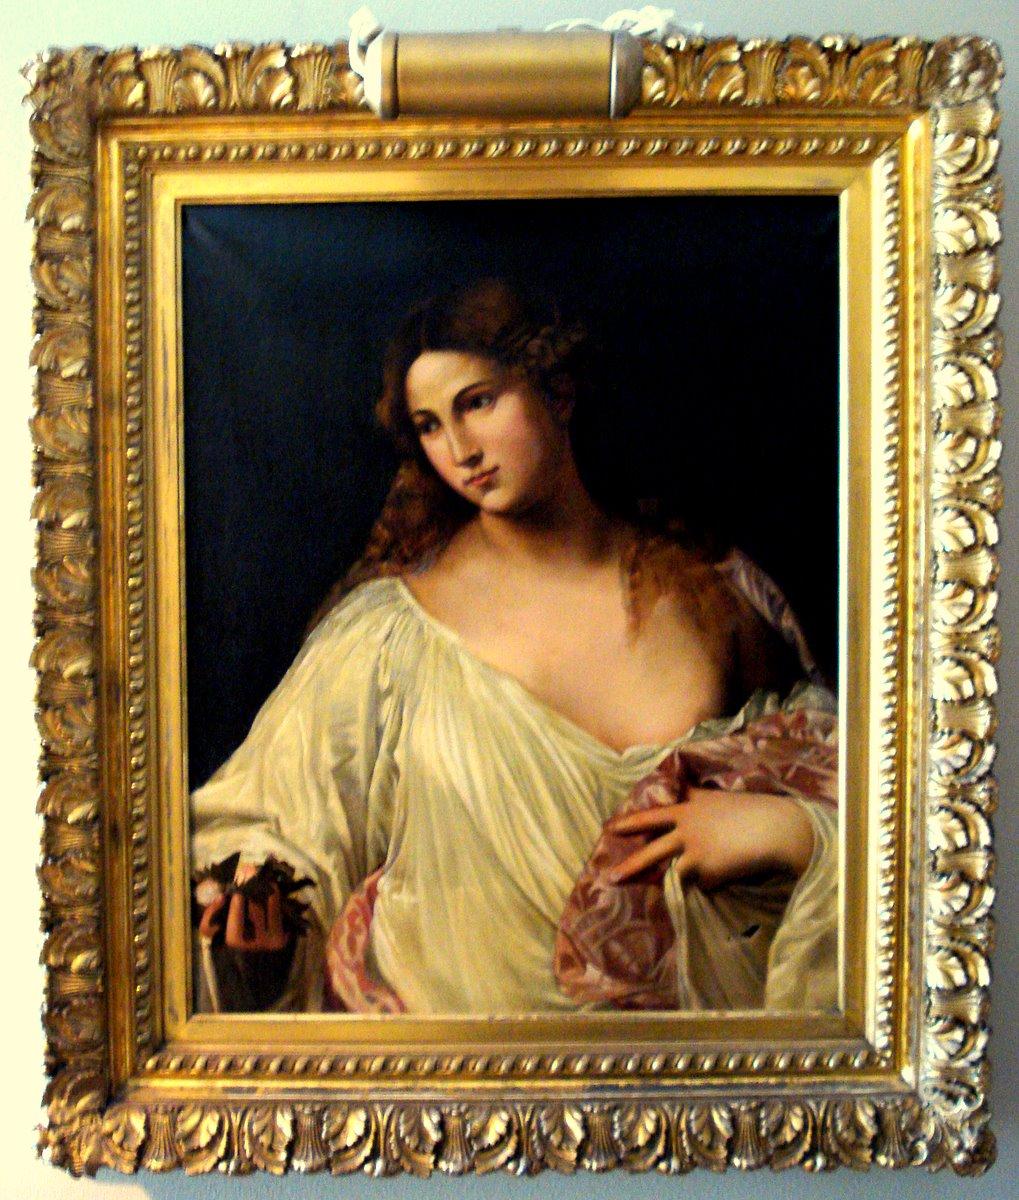 Titian painted Flora, circa 1515. We believe this is an early 16th century copy by Jacopo Palma il Vecchio (1480-1528) in a magnificent antique gold leaf frame. The original (shown in the last image) hangs in the Uffizi Gallery in Florence.

The